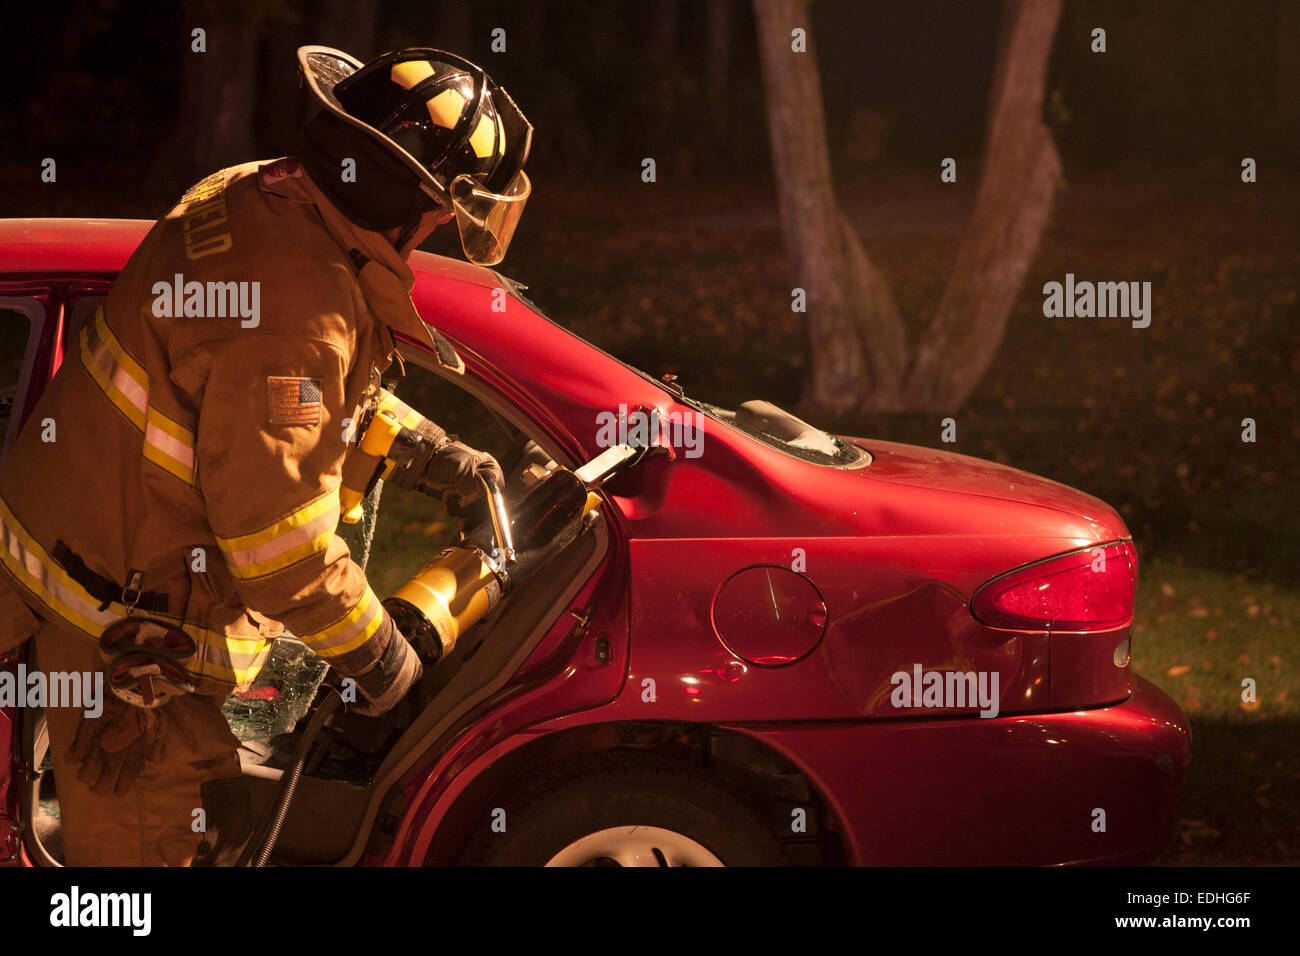 Richfield Fire Department firefighter performing extrication demonstration on a vehicle Stock Photo